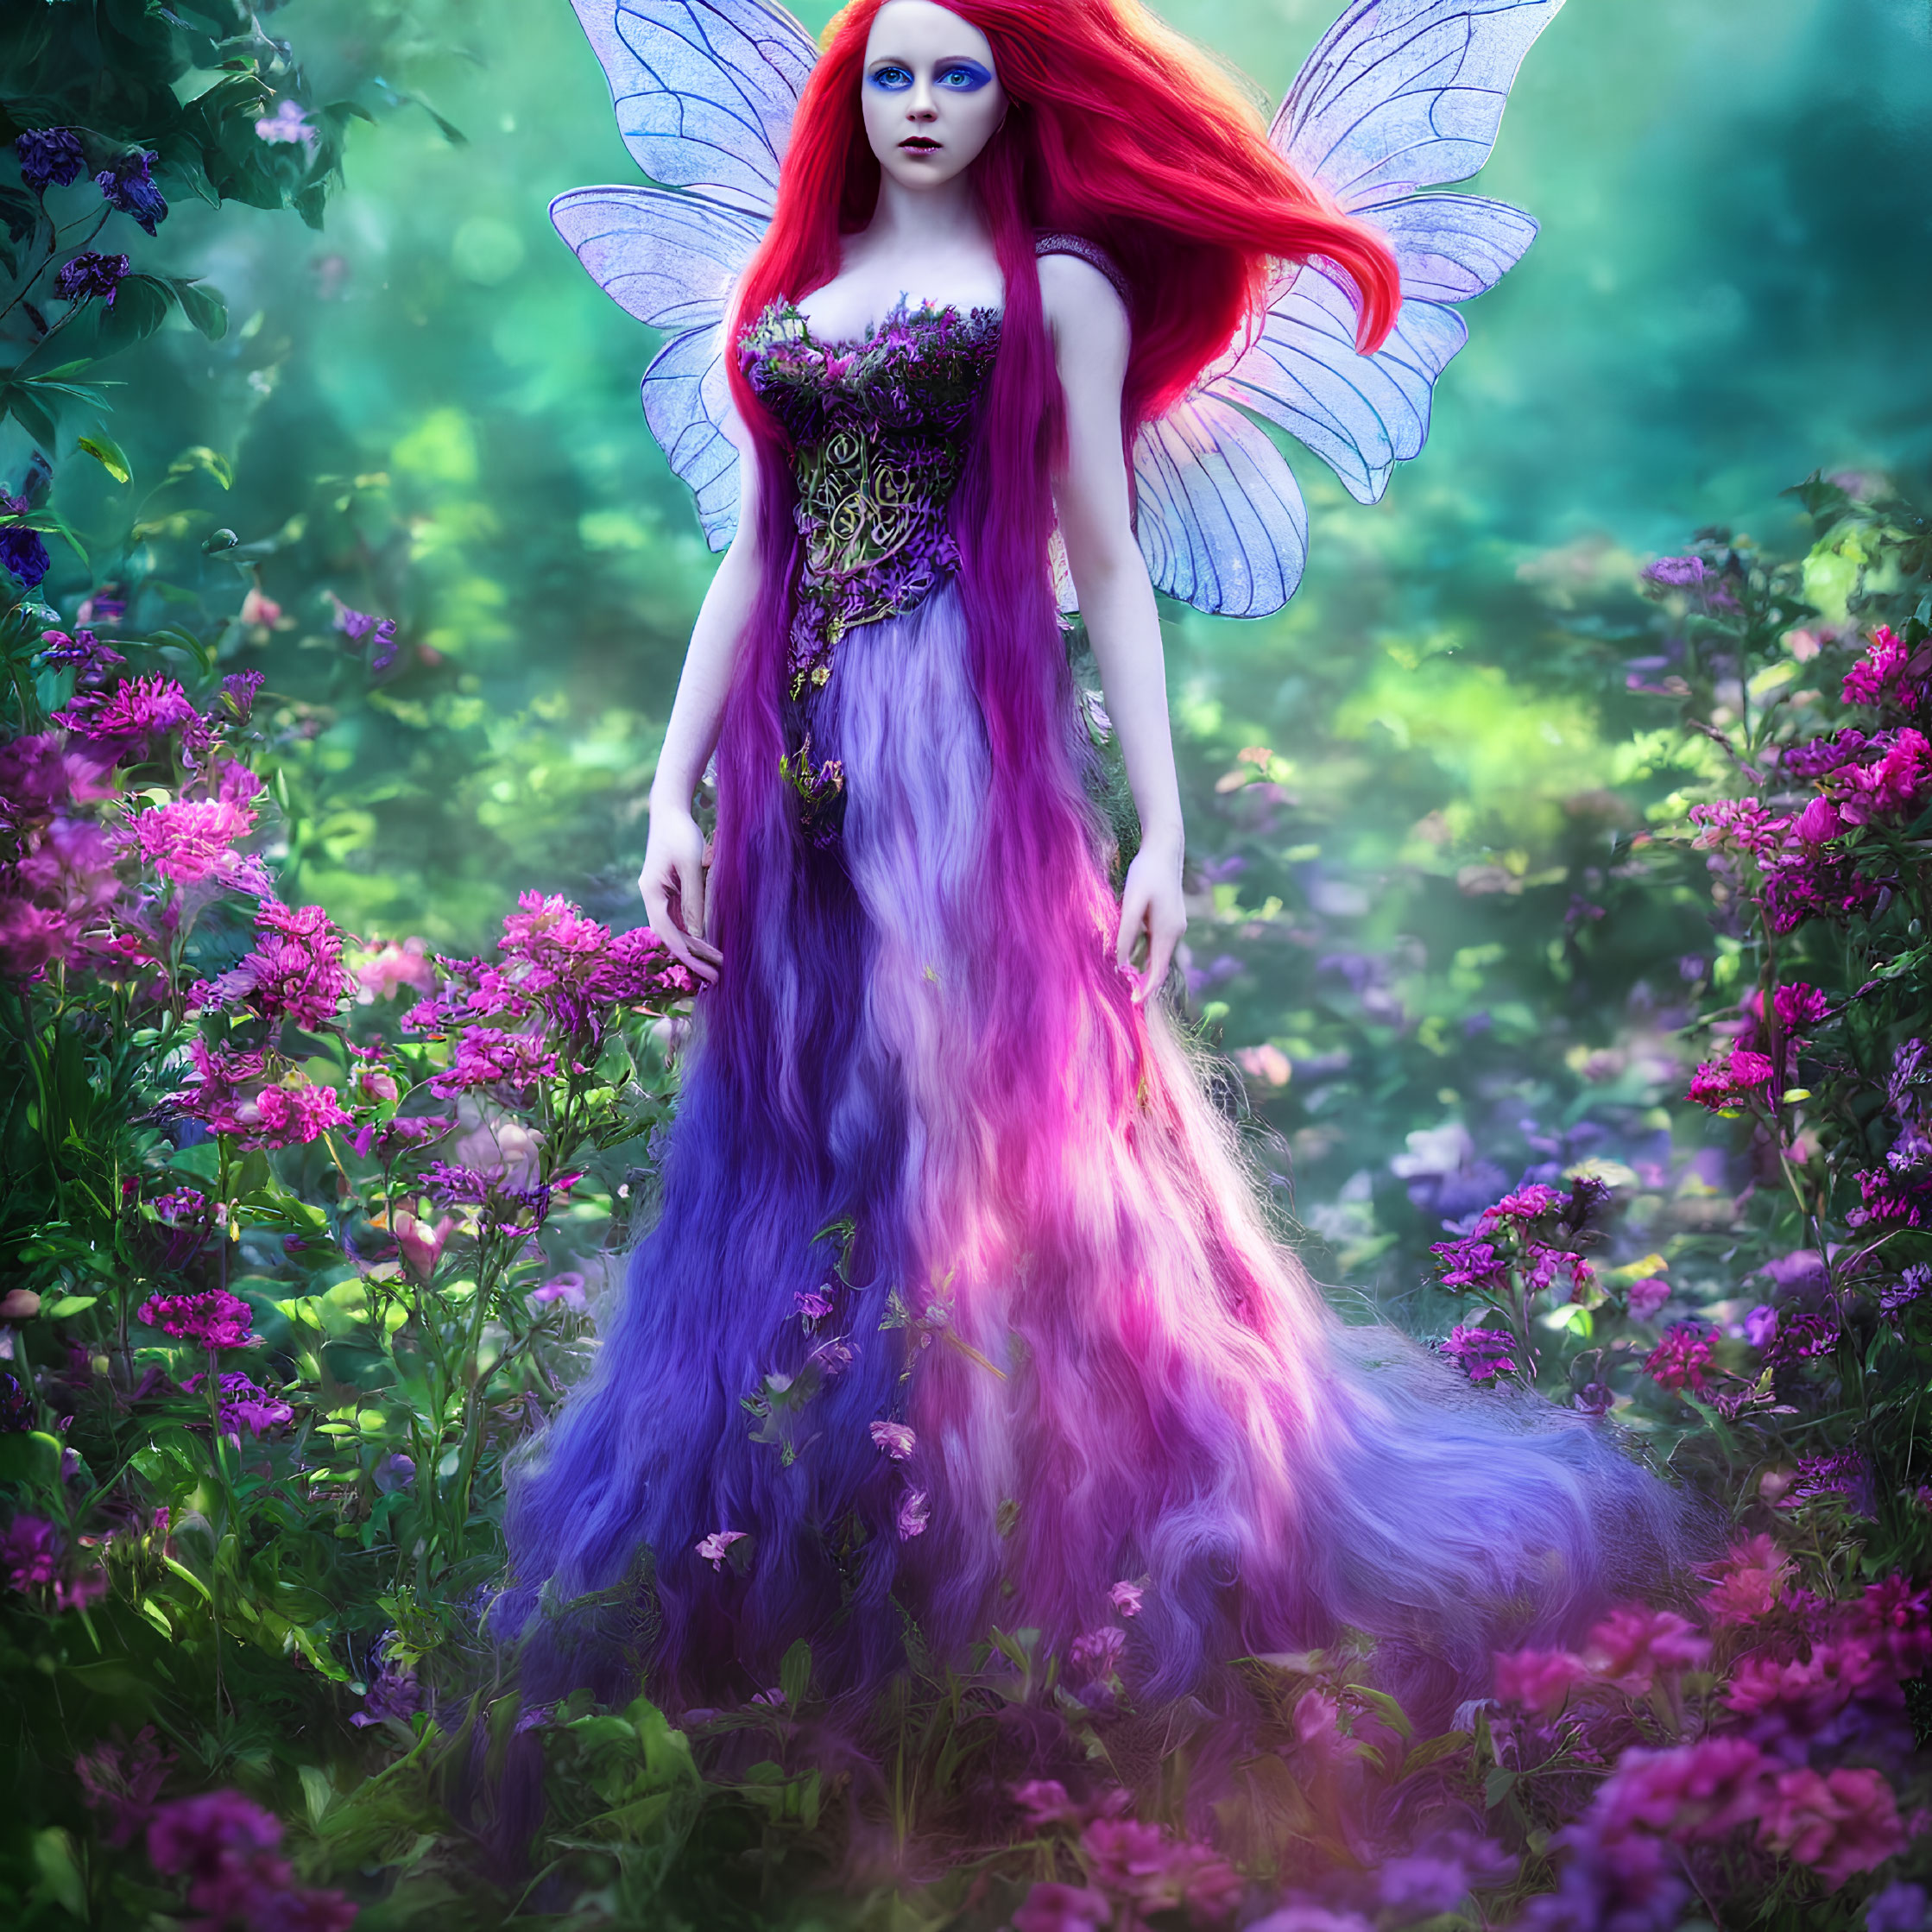 Colorful fairy with red hair and iridescent wings in a floral setting